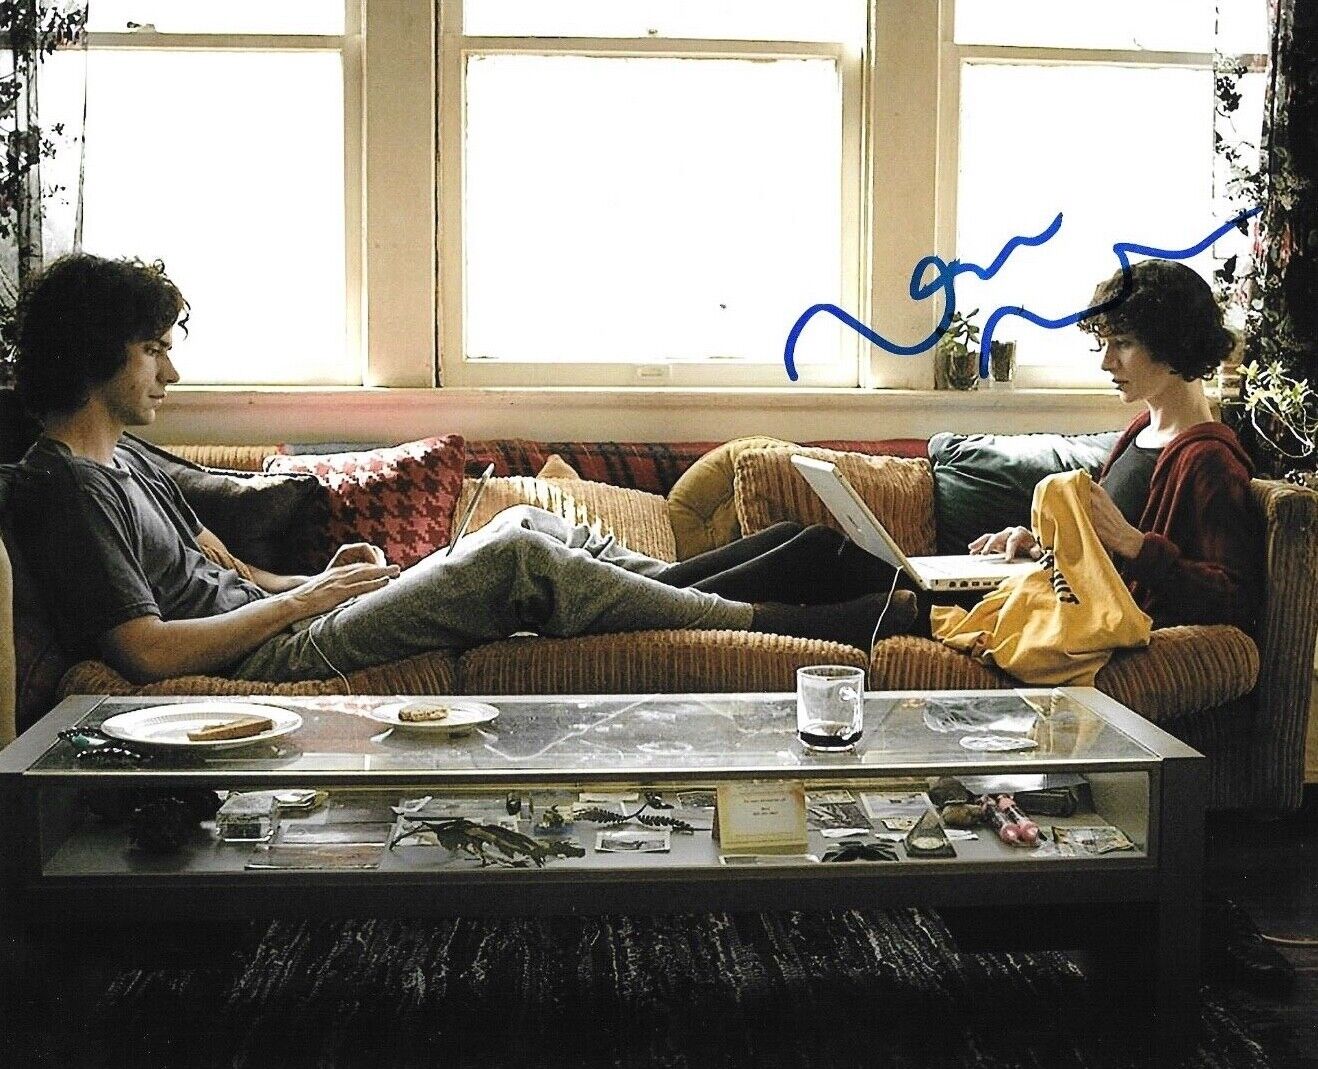 * MIRANDA JULY * signed autographed 8x10 Photo Poster painting * THE FUTURE * COA * 3